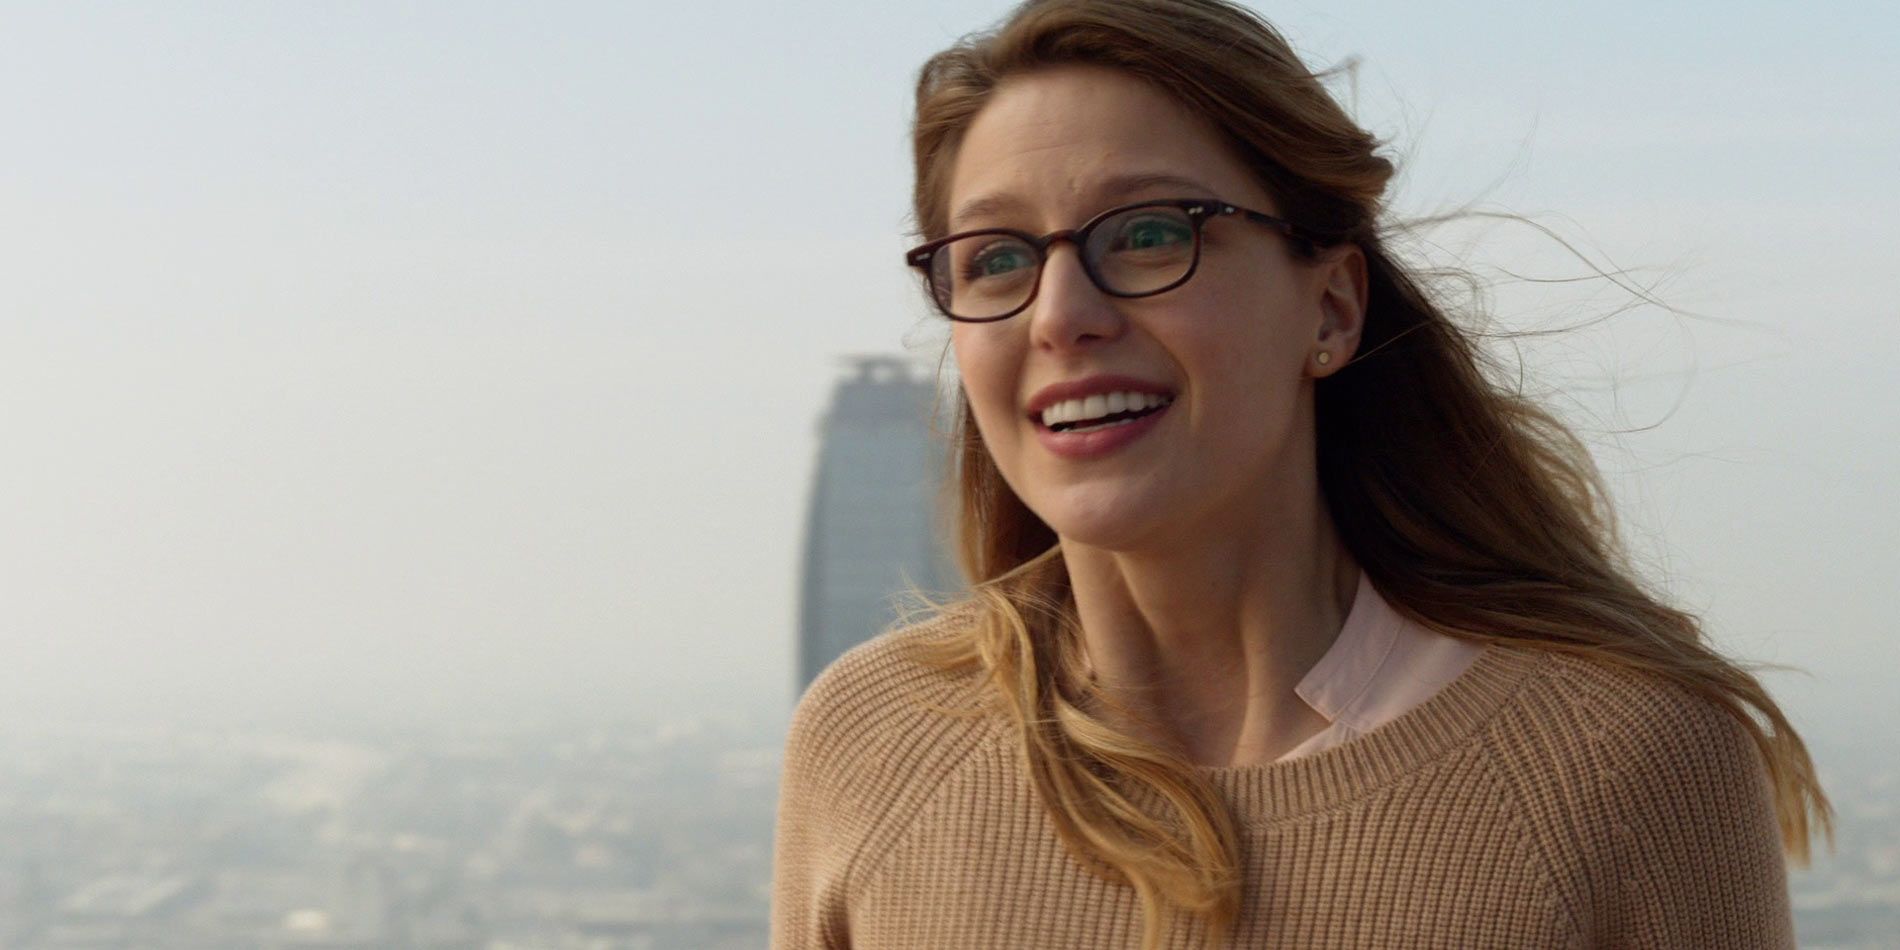 Kara Danvers with National City in the background in Supergirl